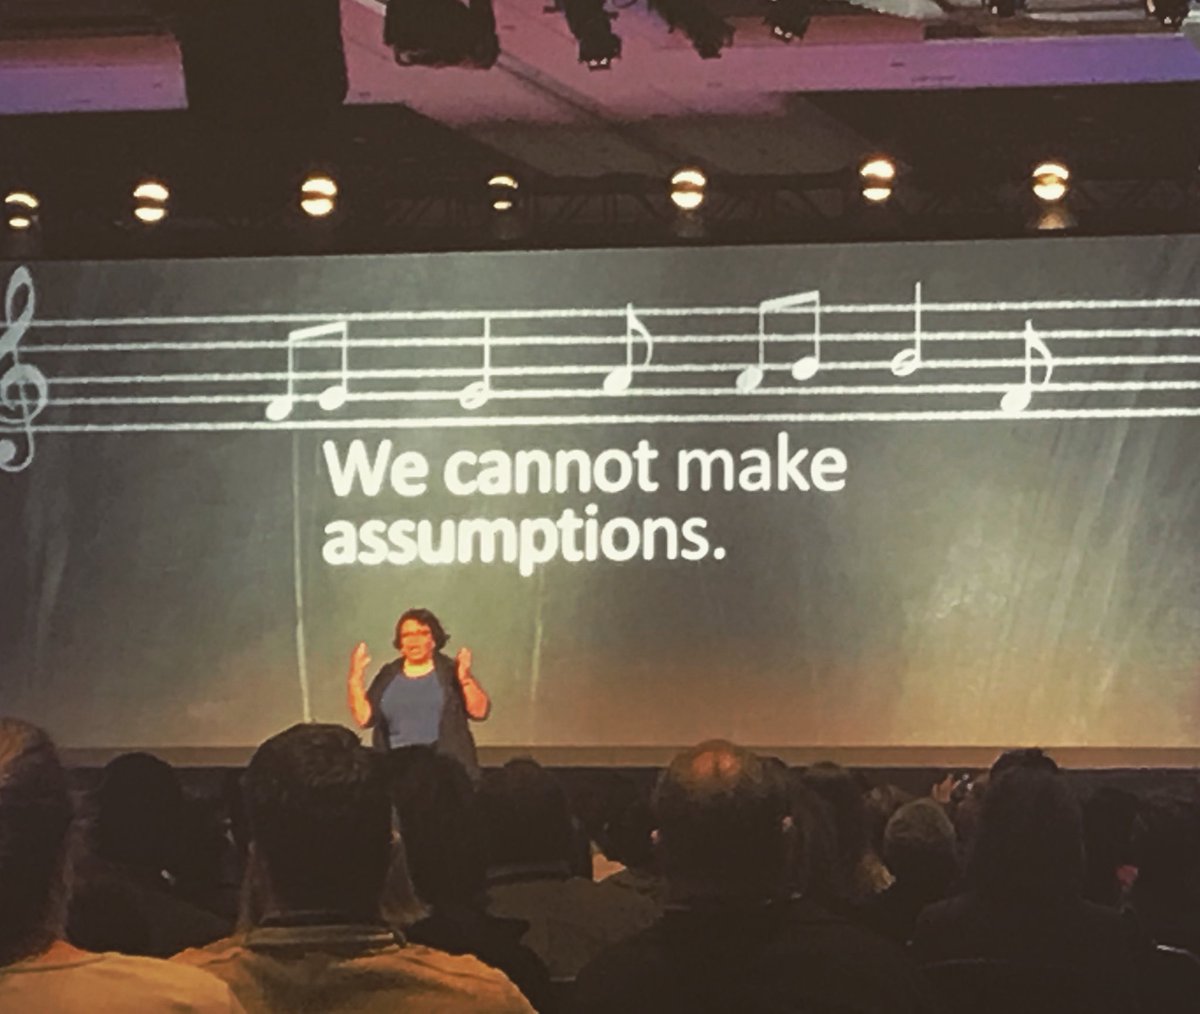 “We never know the baggage that students bring into our classrooms. We can’t make assumptions. We should swing wide the door of opportunity so they can walk through.” Princess Moss #NEASummit